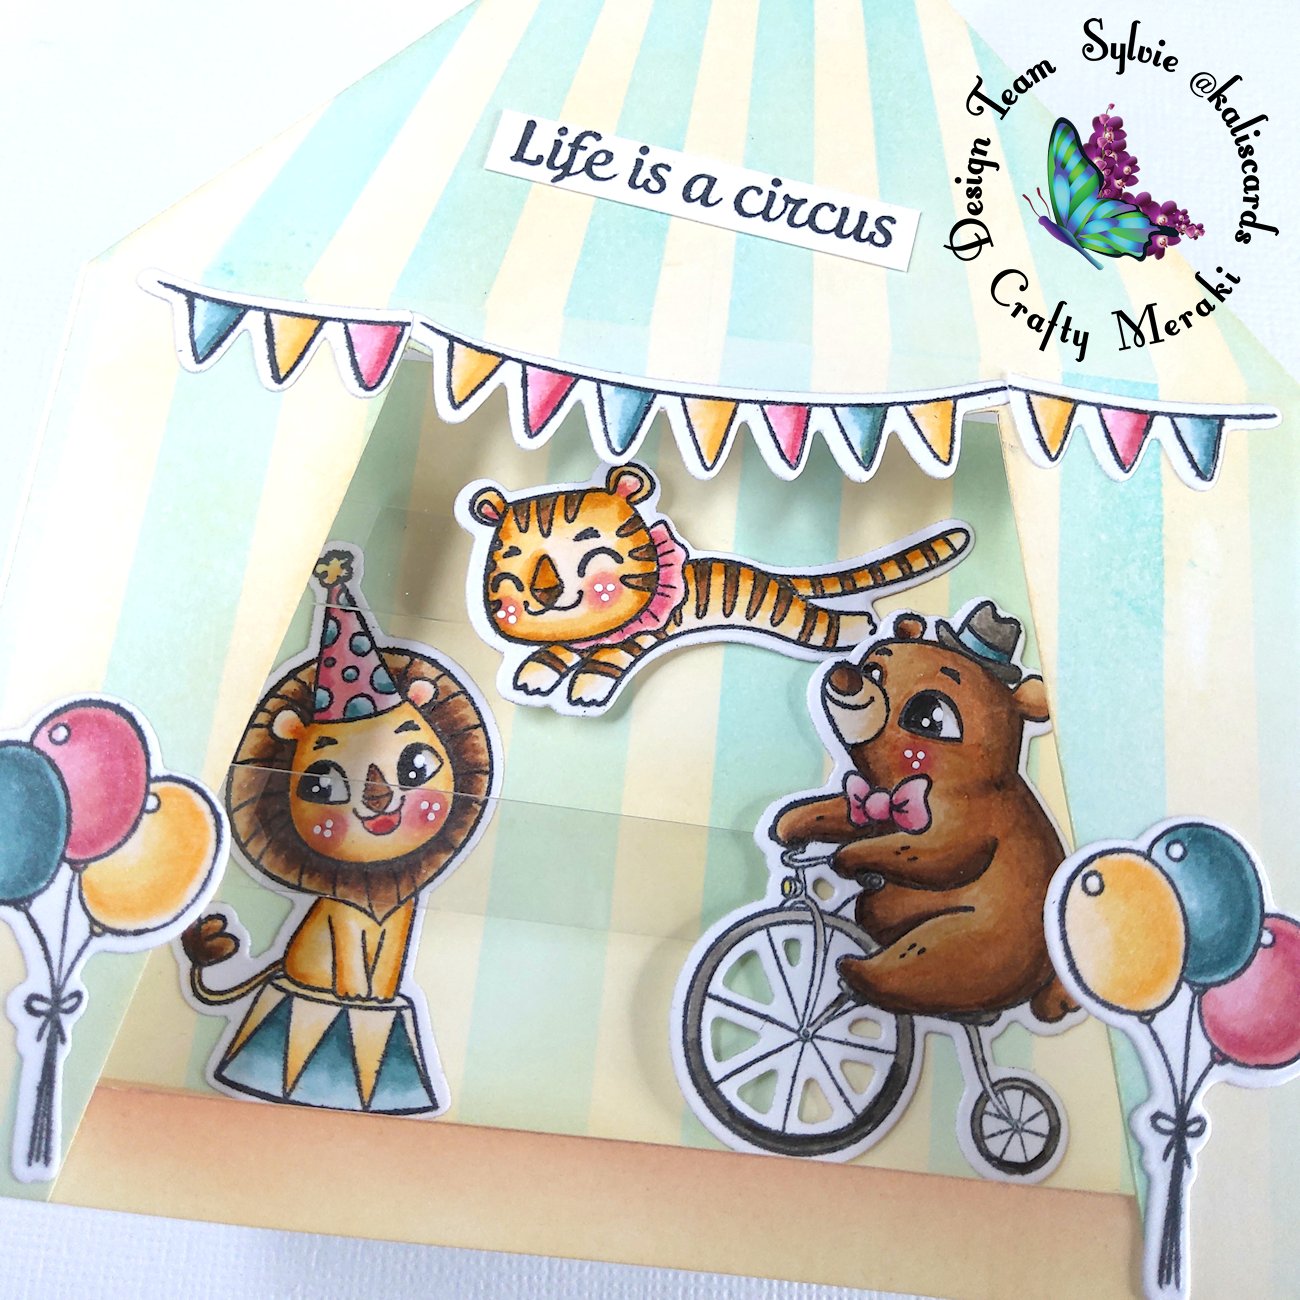 Life is a circus by Sylvie @Kaliscards